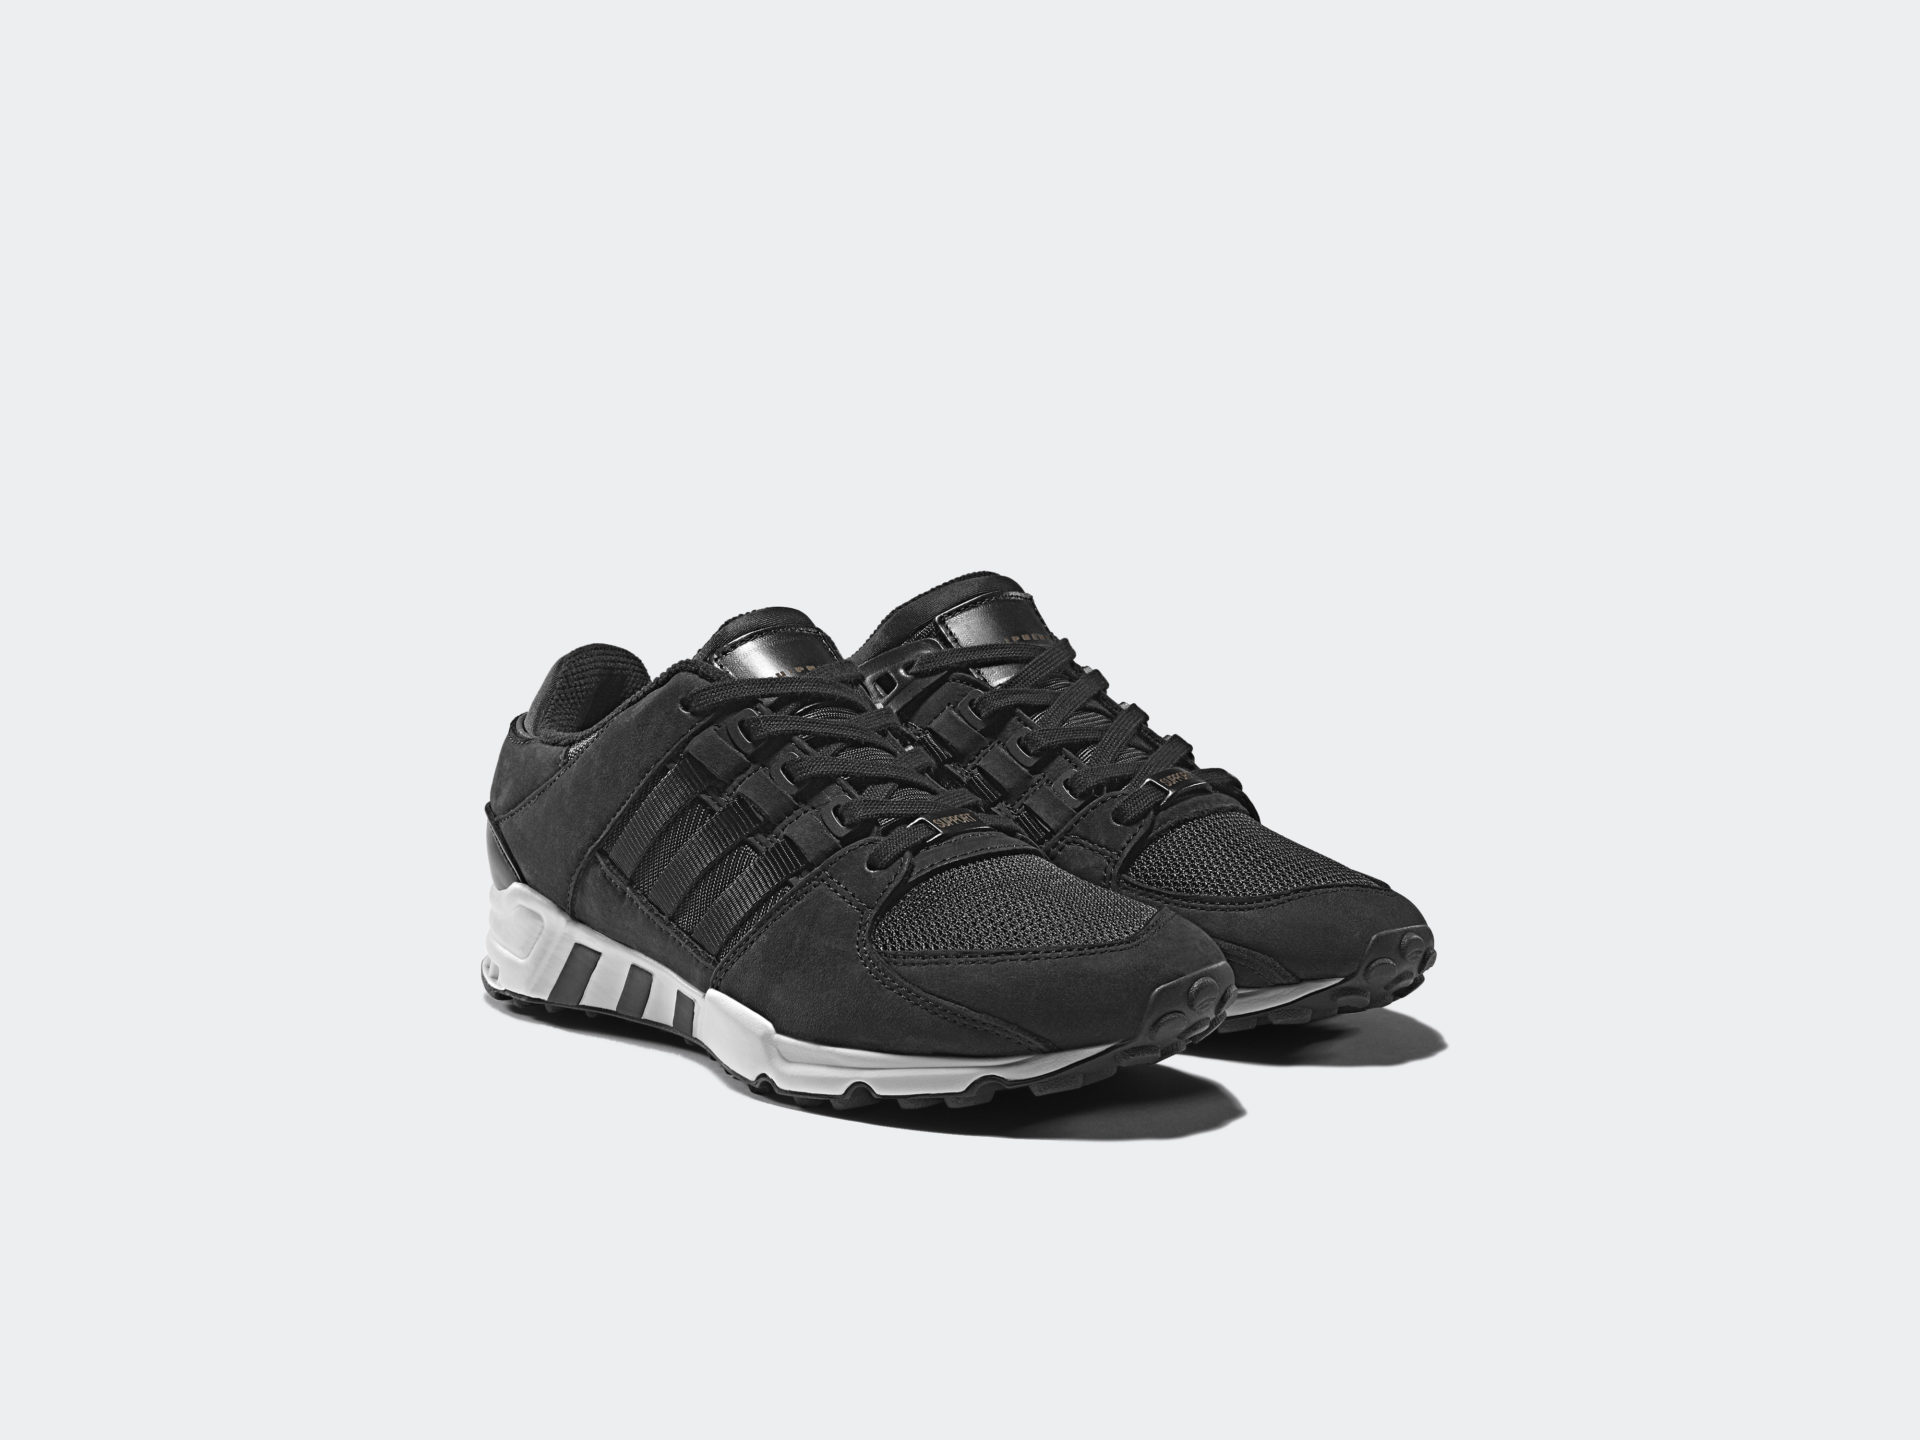 adidas EQT Support RF "Milled Leather"